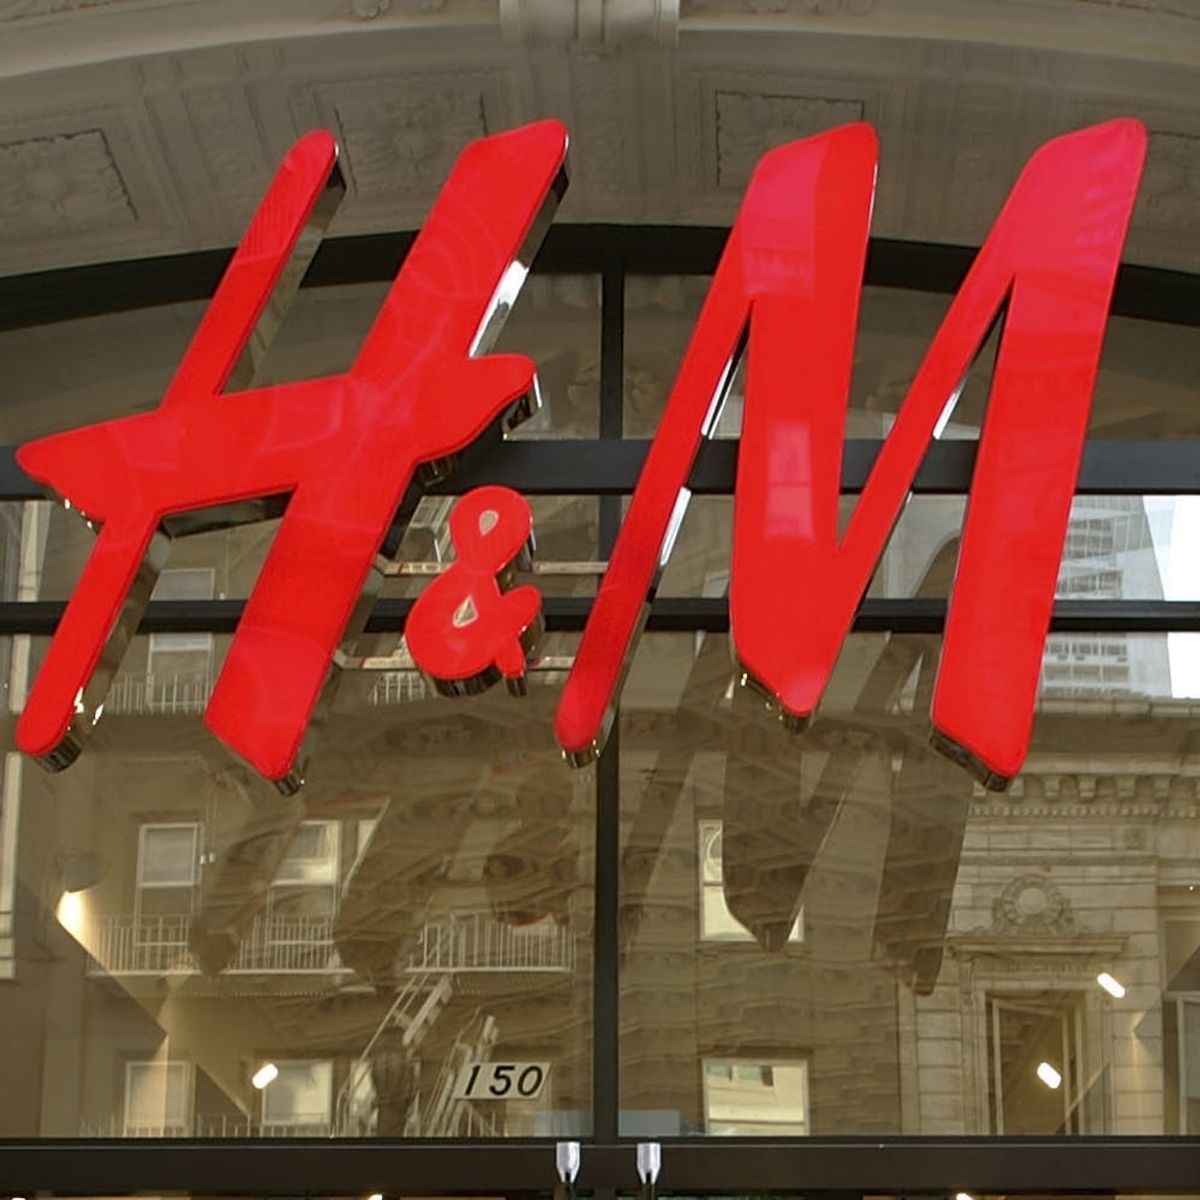 H&M Is Fueling a Power Plant in Sweden With Its Unused Clothing